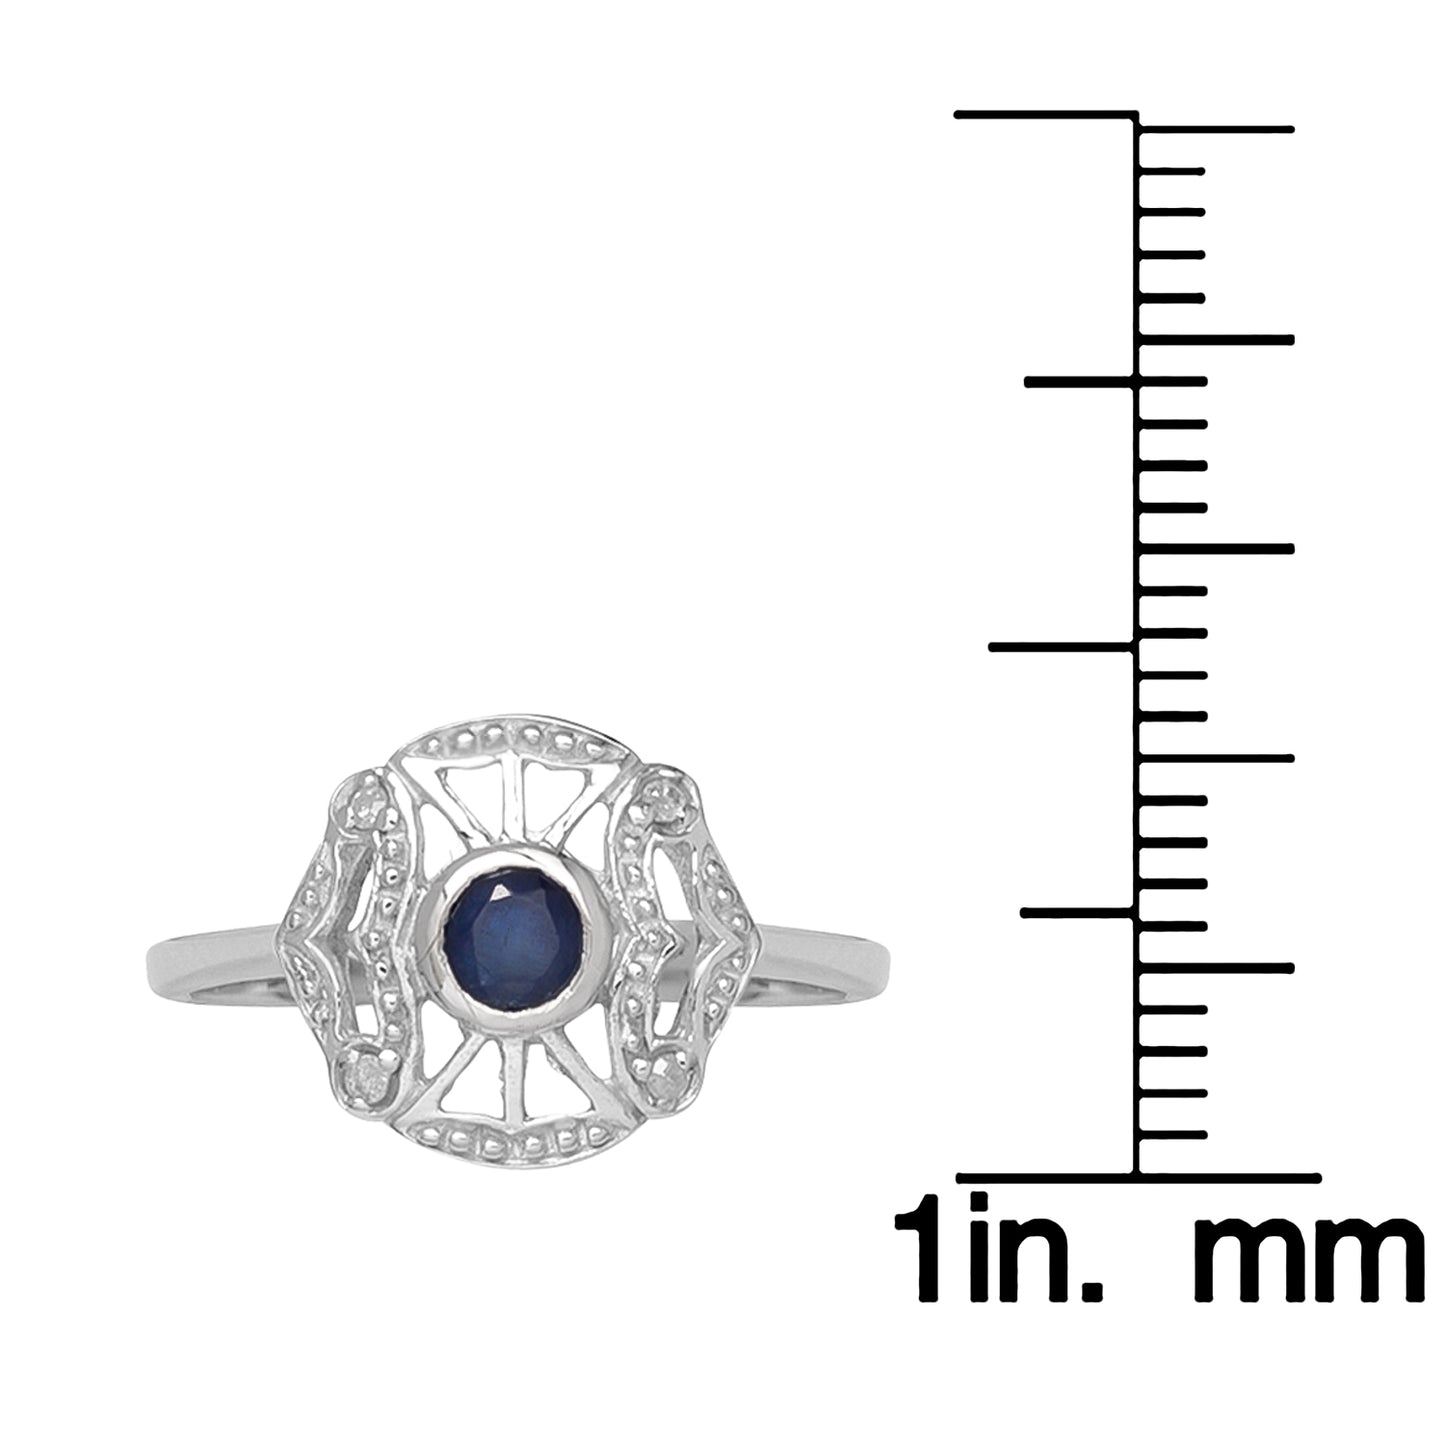 10k White Gold Vintage Style Genuine Round Sapphire and Diamond Accent Ring